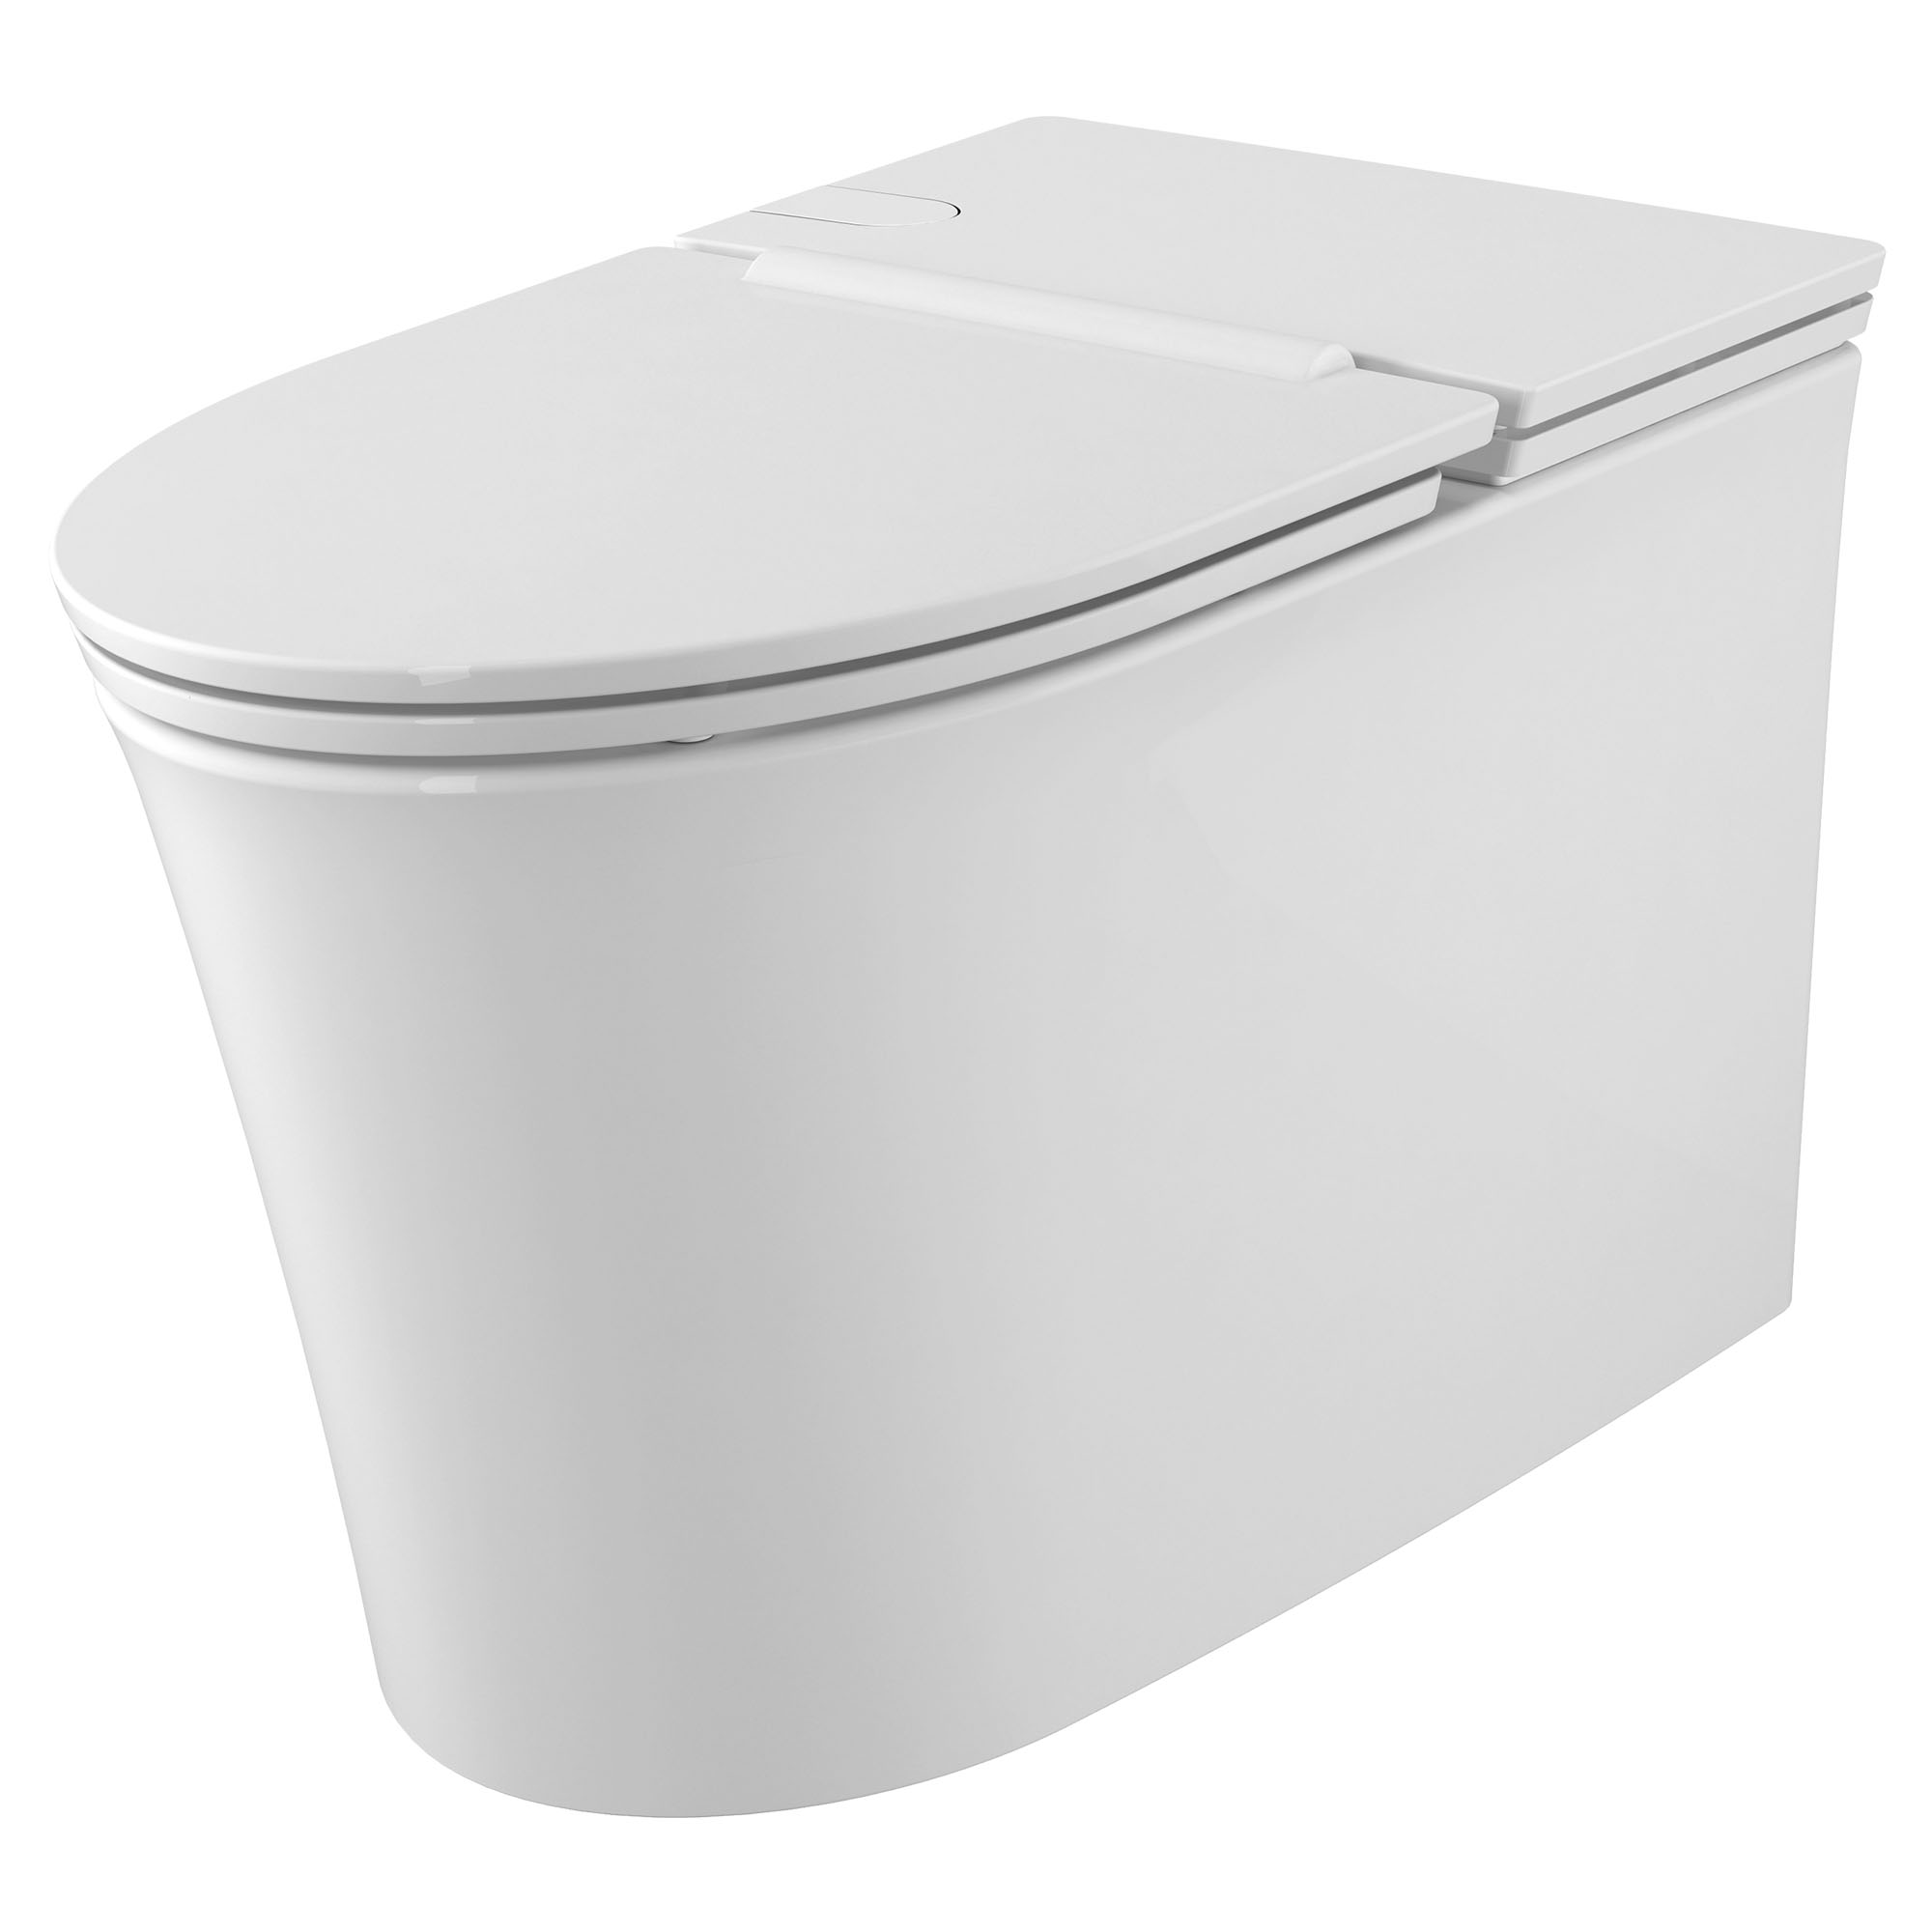 American Standard Studio S 1-piece 1.0 GPF White Elongated Low-Profile Toilet, Seat Included - image 3 of 14